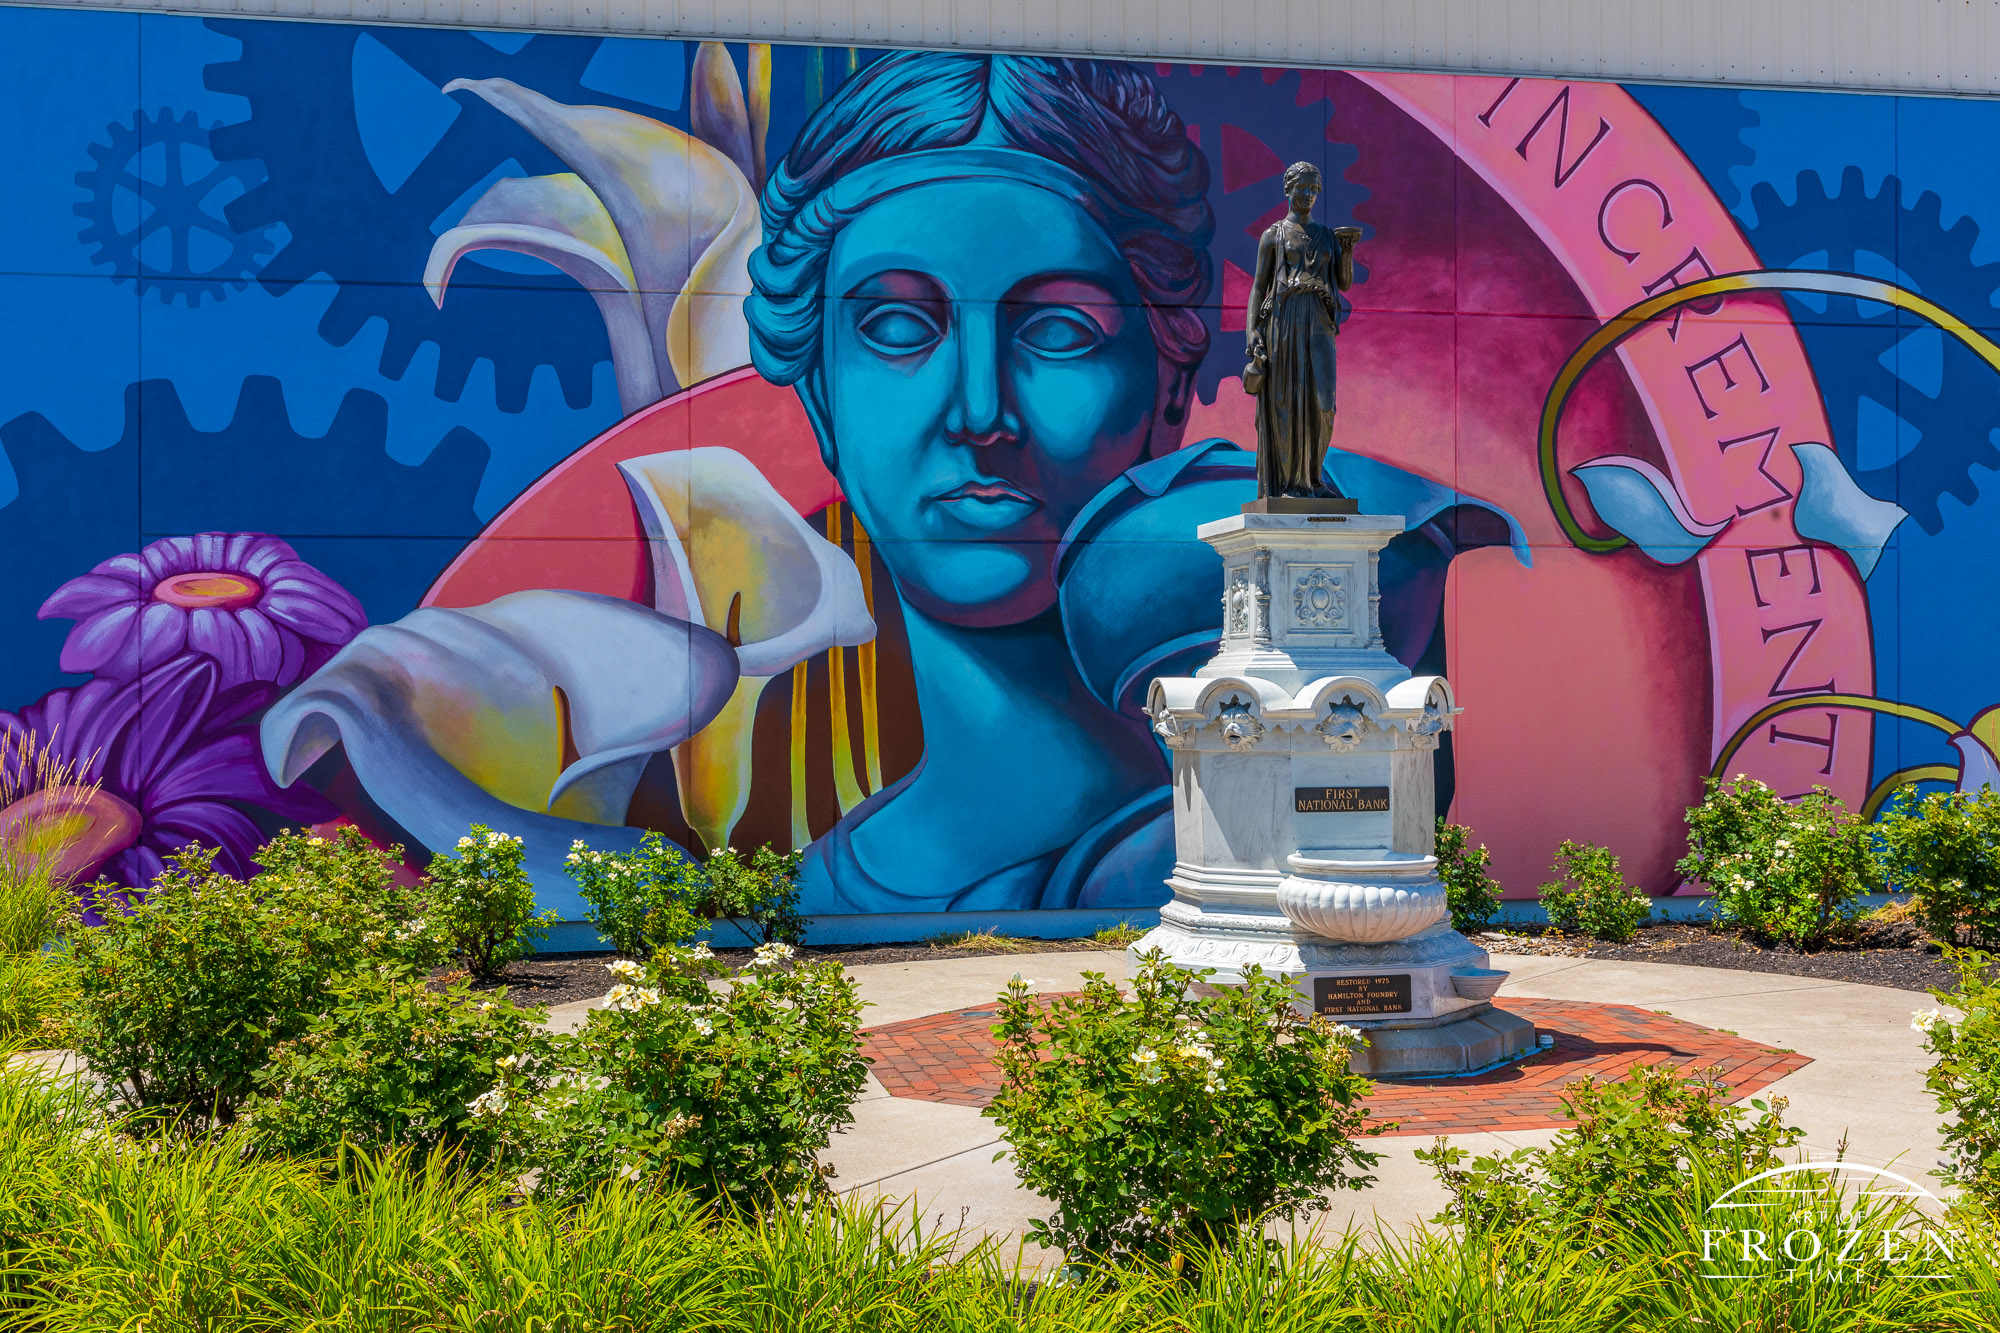 A colorful mural in Hamilton Ohio where the Greek subject of the mural matches the bronze sculpture mounted on a stone plinth.